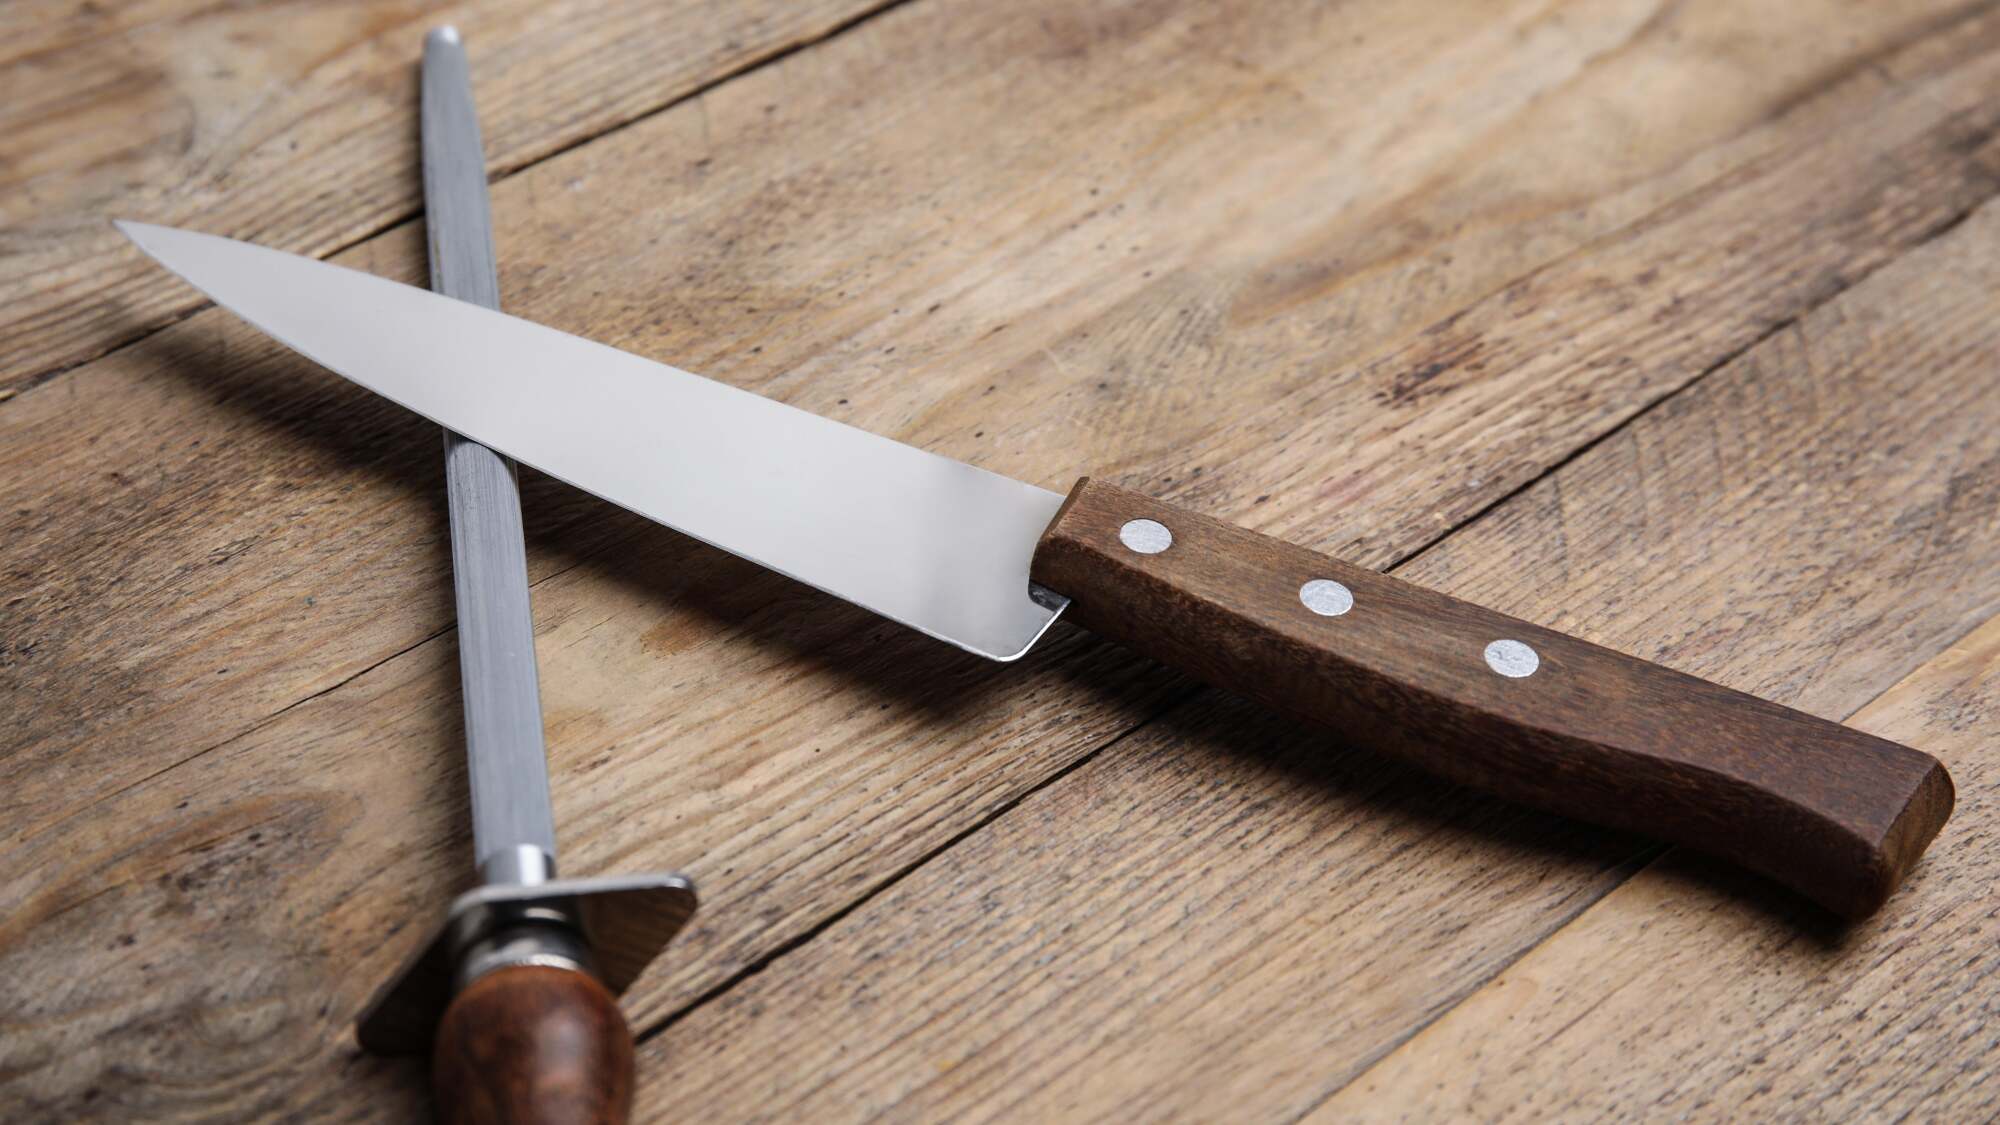 A knife and honing steel sit on a table.